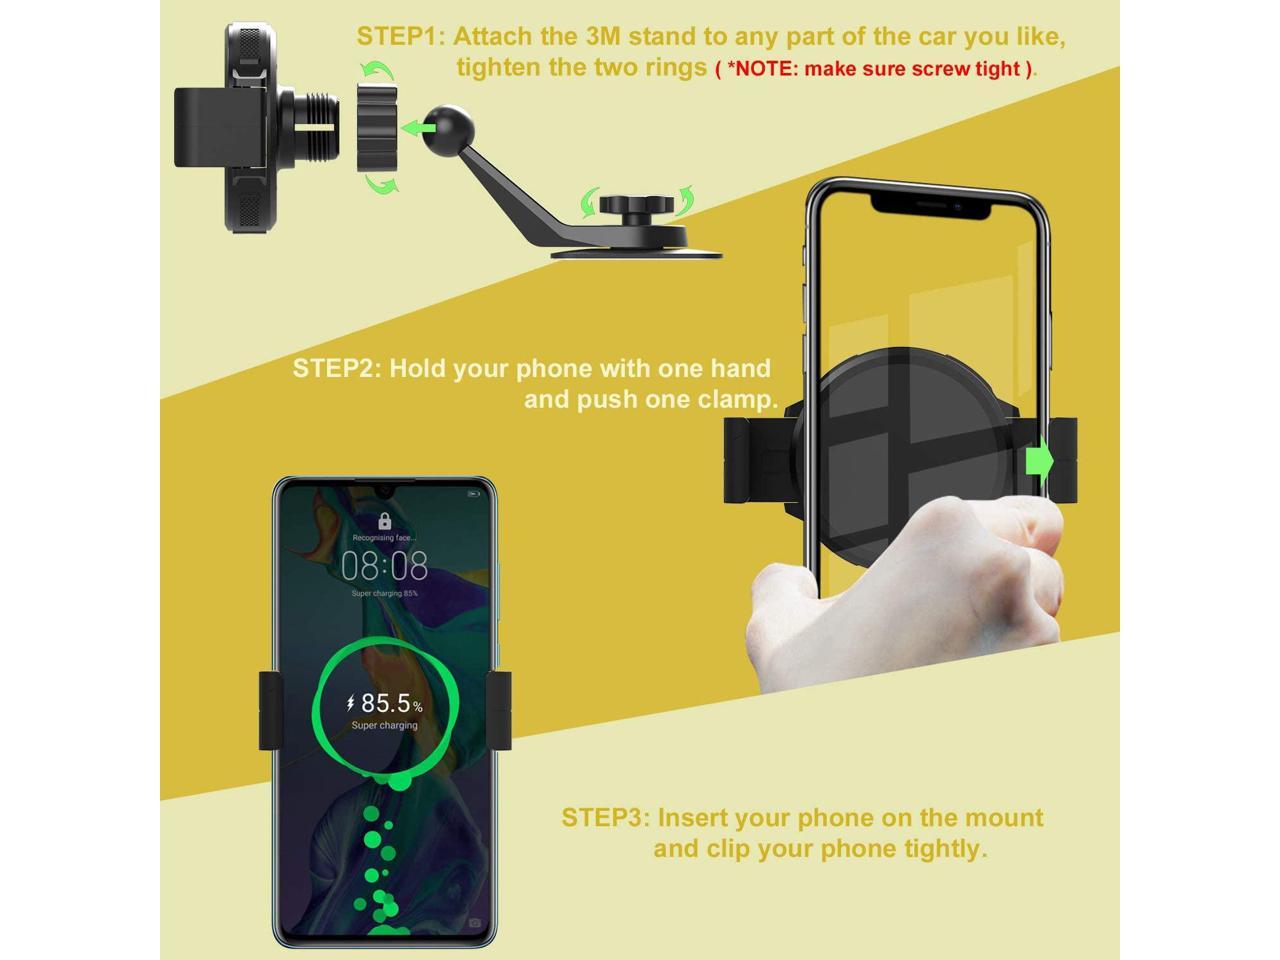 Note 10 Note 9 and More Black Universal Smartphone Car Holder Cradle Wireless Car Charger Mount for iPhone 11 Pro Max 11 Pro 11 XS MAX XS XR X 8 Samsung Galaxy S10 S9 S8 KOAKUMA Car Phone Mount 